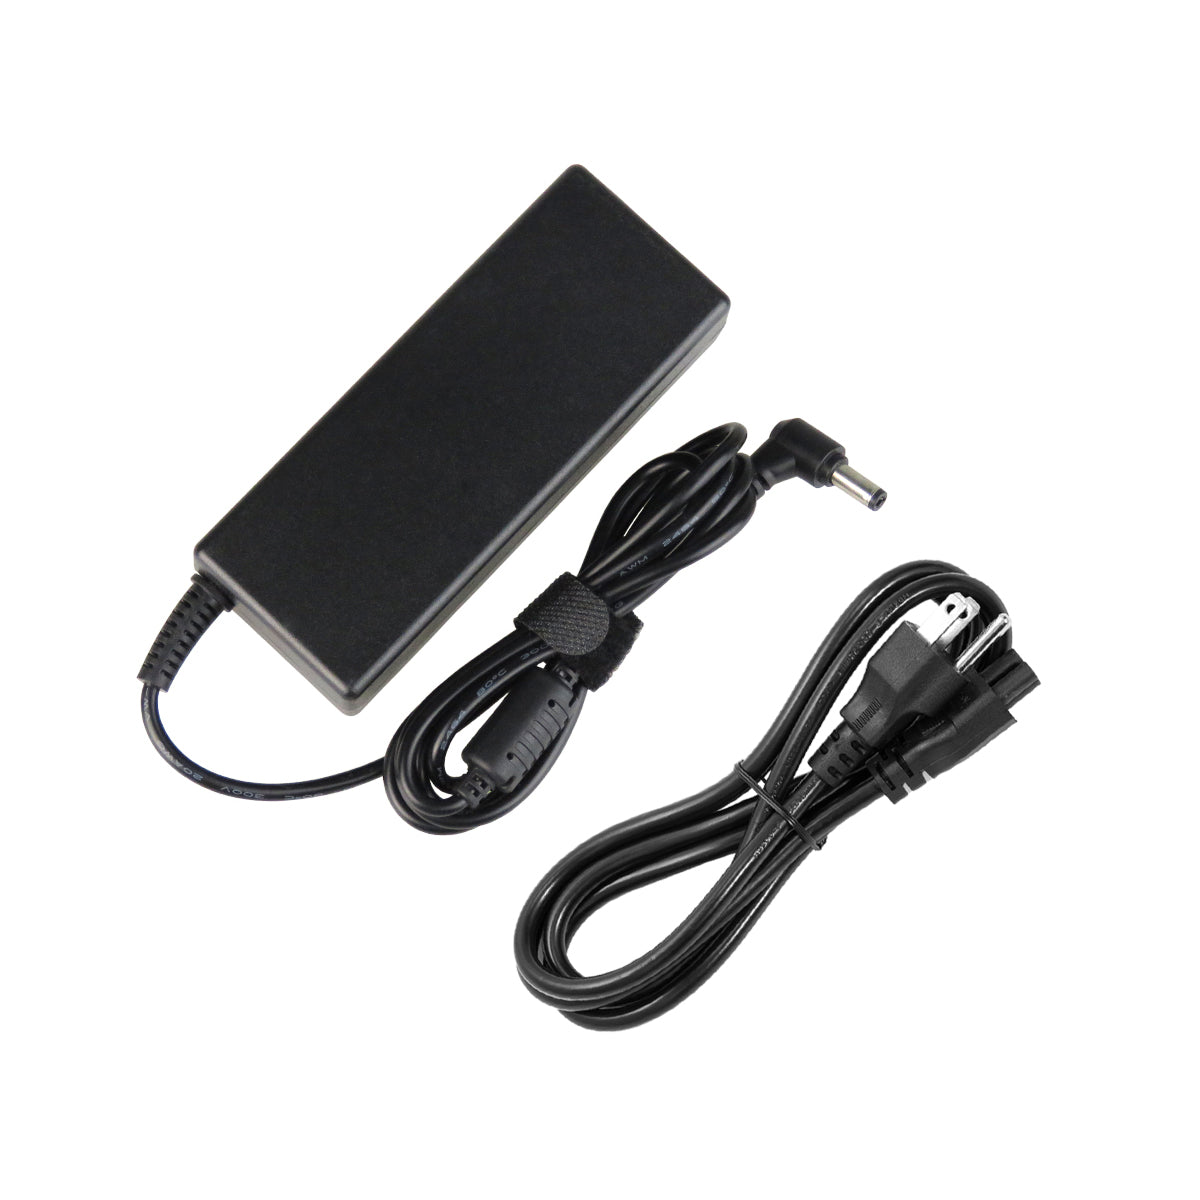 AC Adapter Charger for ASUS N80VC Notebook.